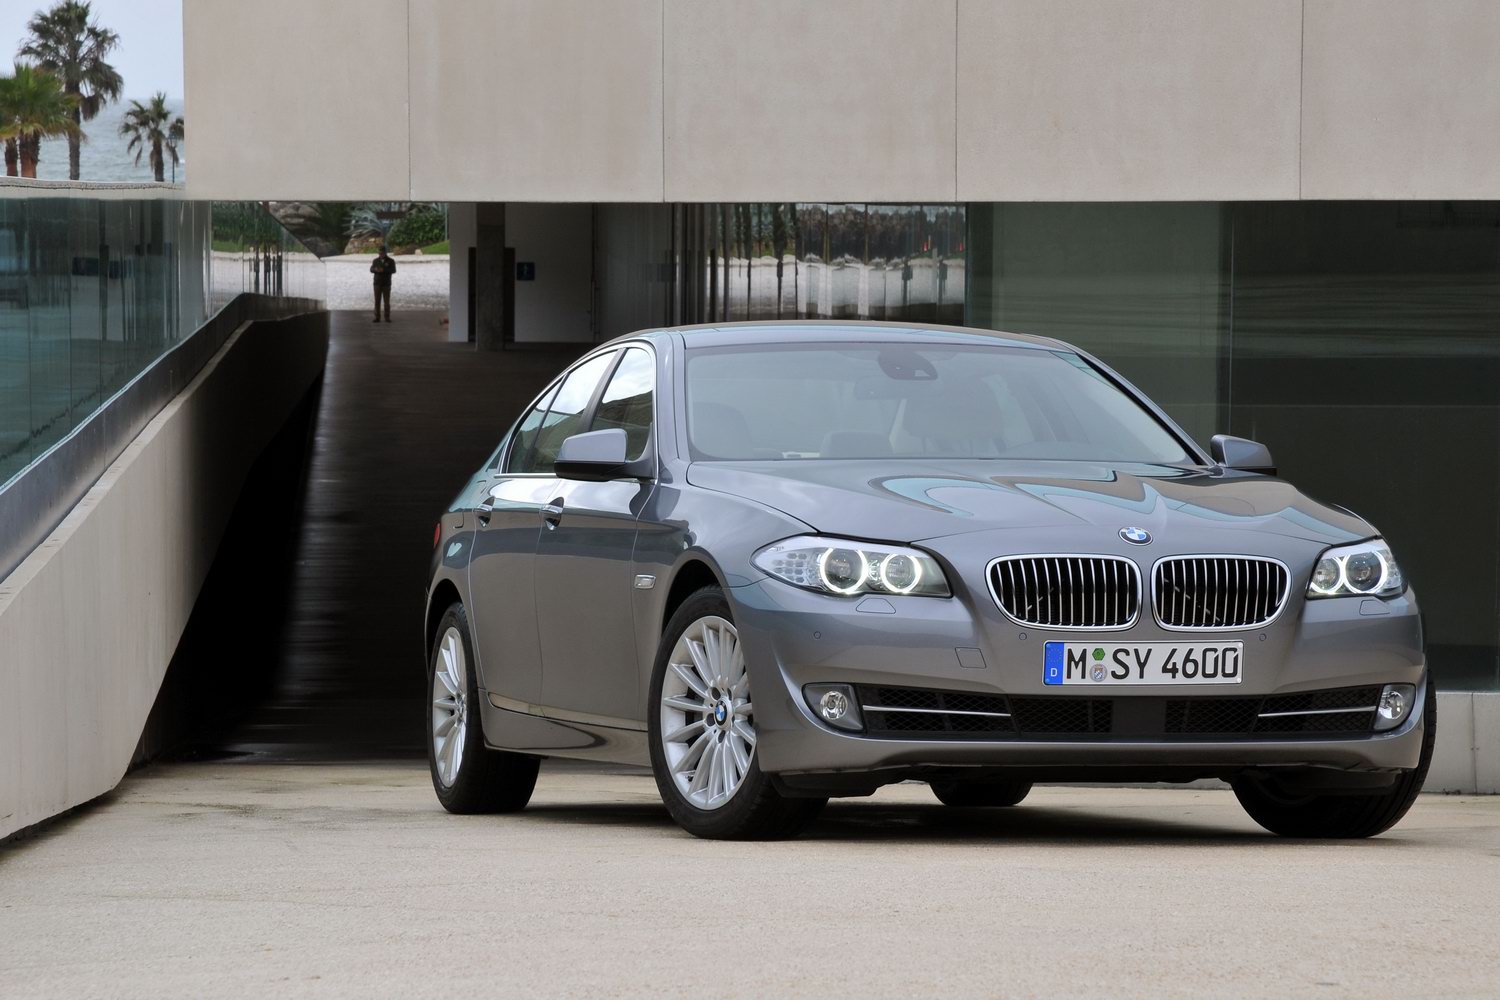 BMW 5 Series F10 (2010-2017) used car buying guide | CompleteCar.ie